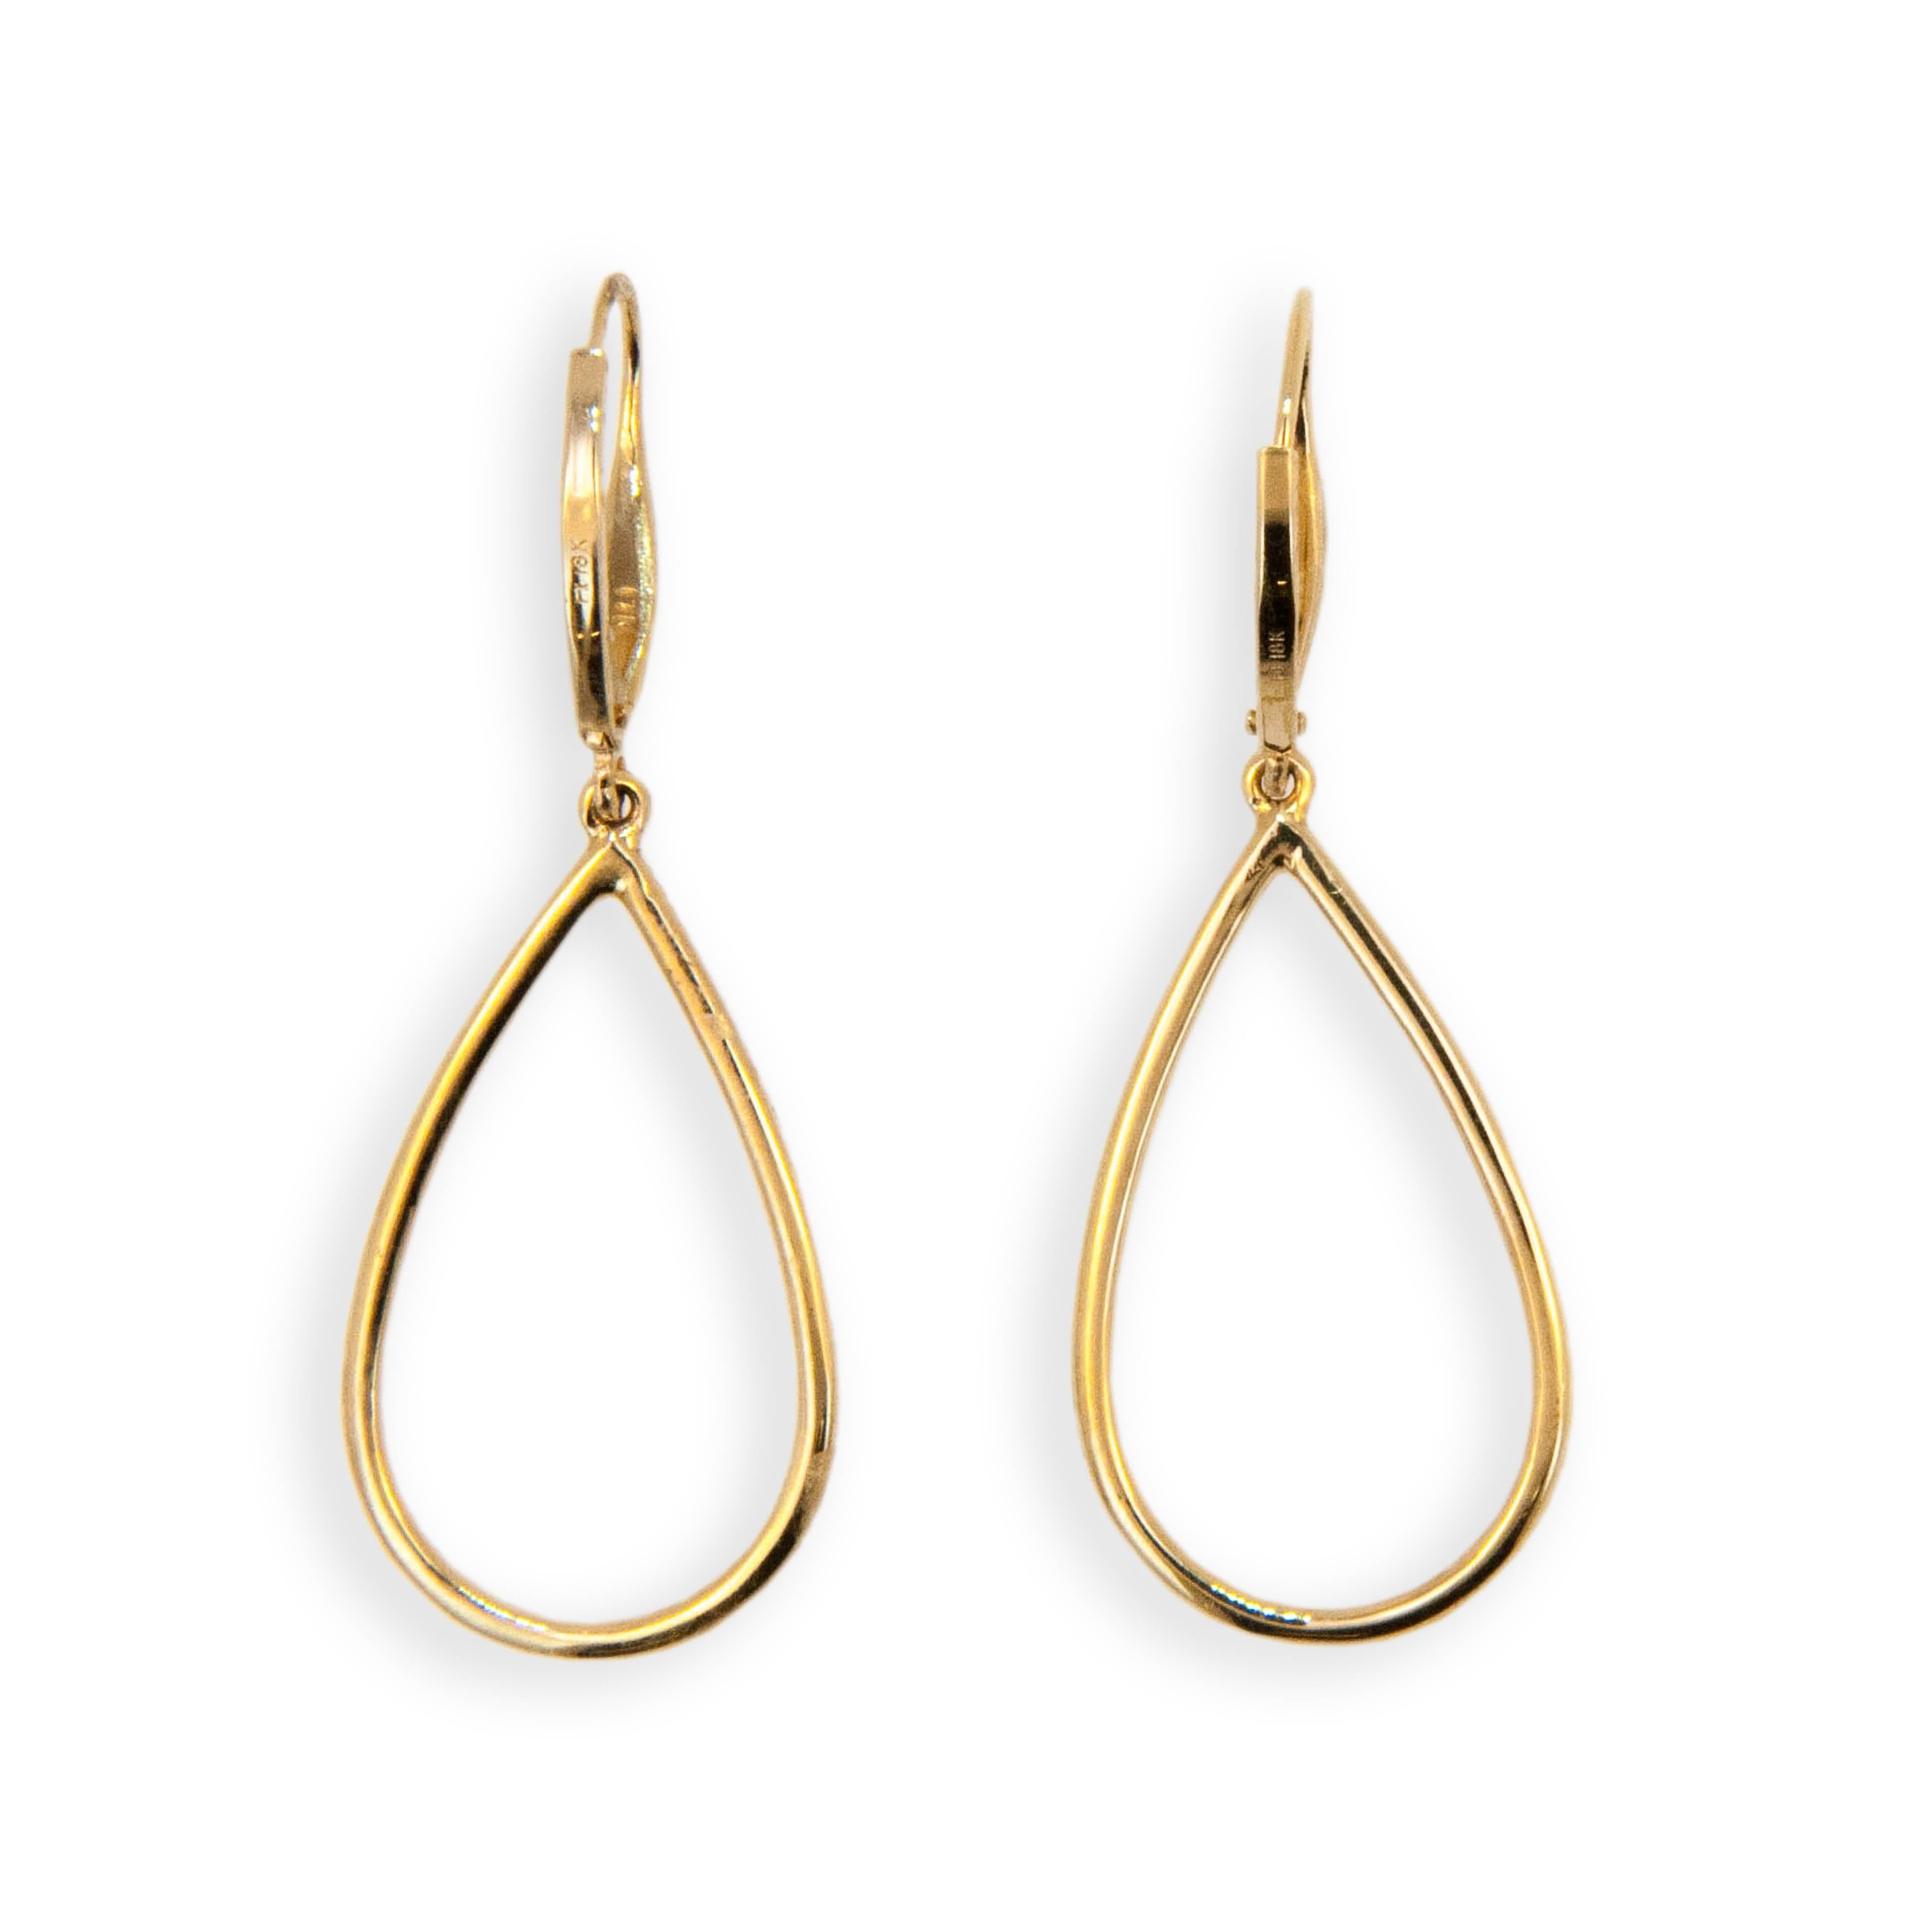 18 karat yellow gold small tear drop earring set with 86 1.0 mm diamonds .44 carats total weight. Lever backs. 